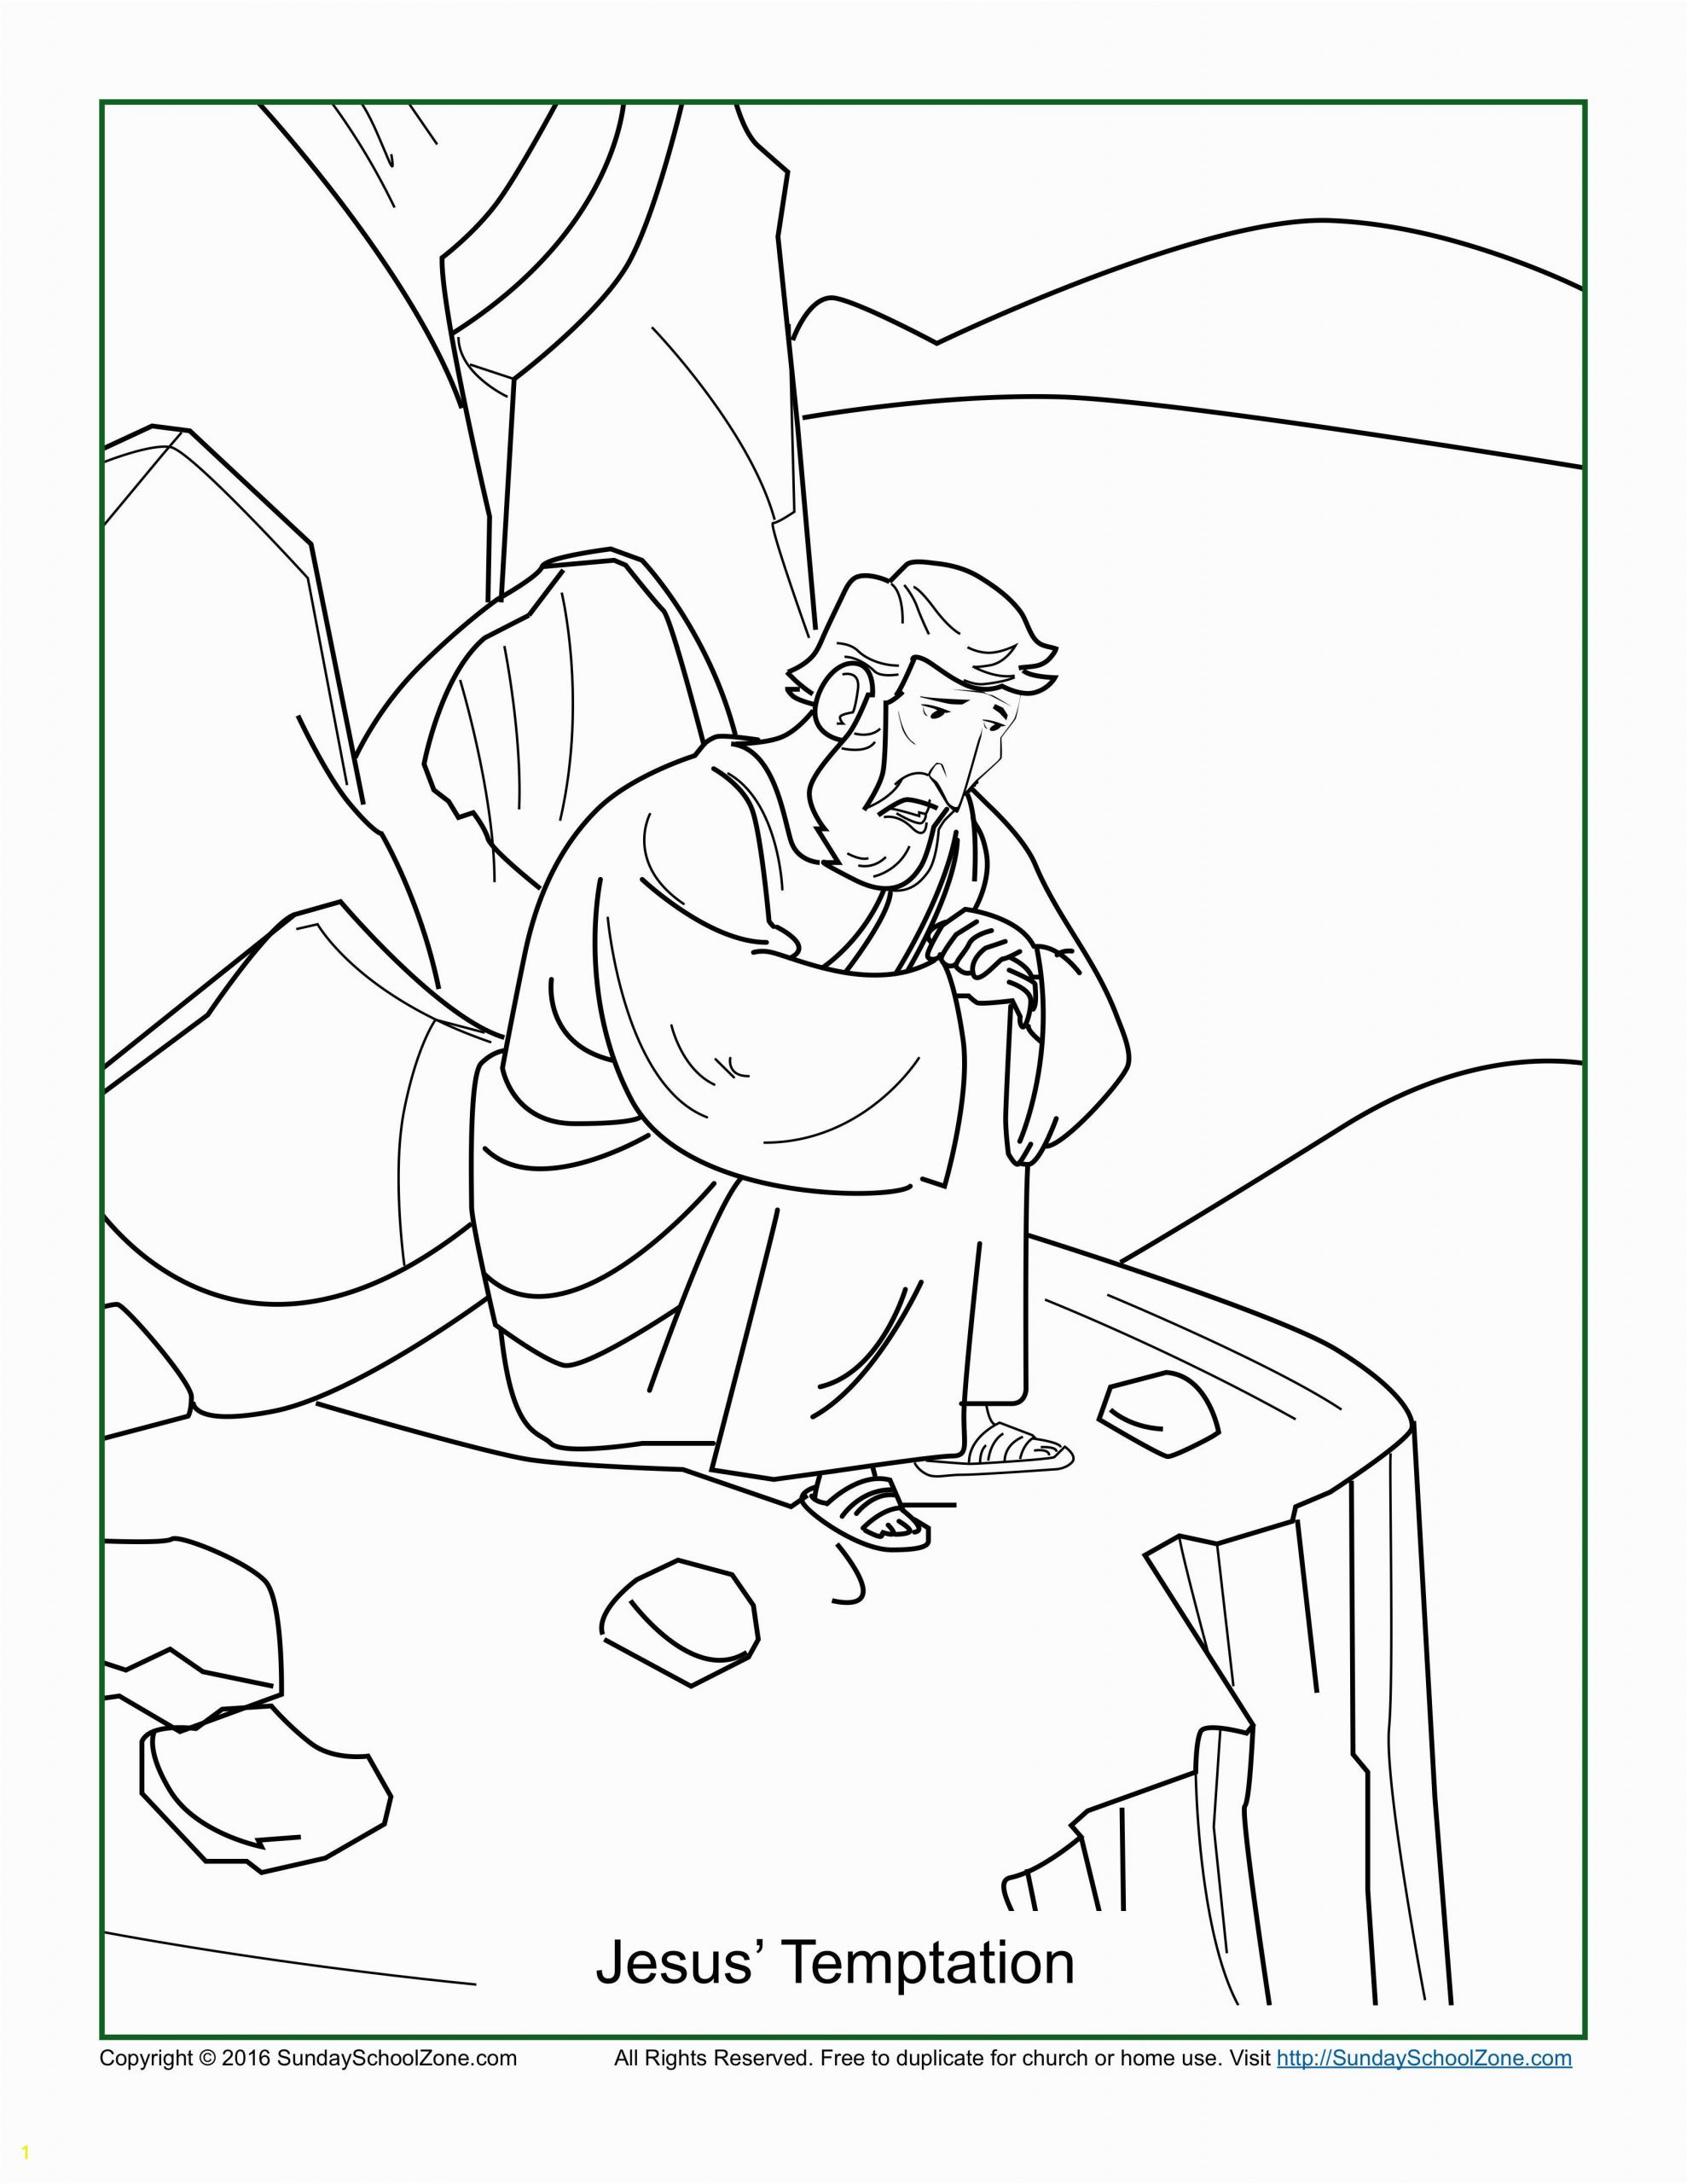 Jesus is Tempted In the Desert Coloring Page Jesus is Tempted Coloring Page Sundayschoolist